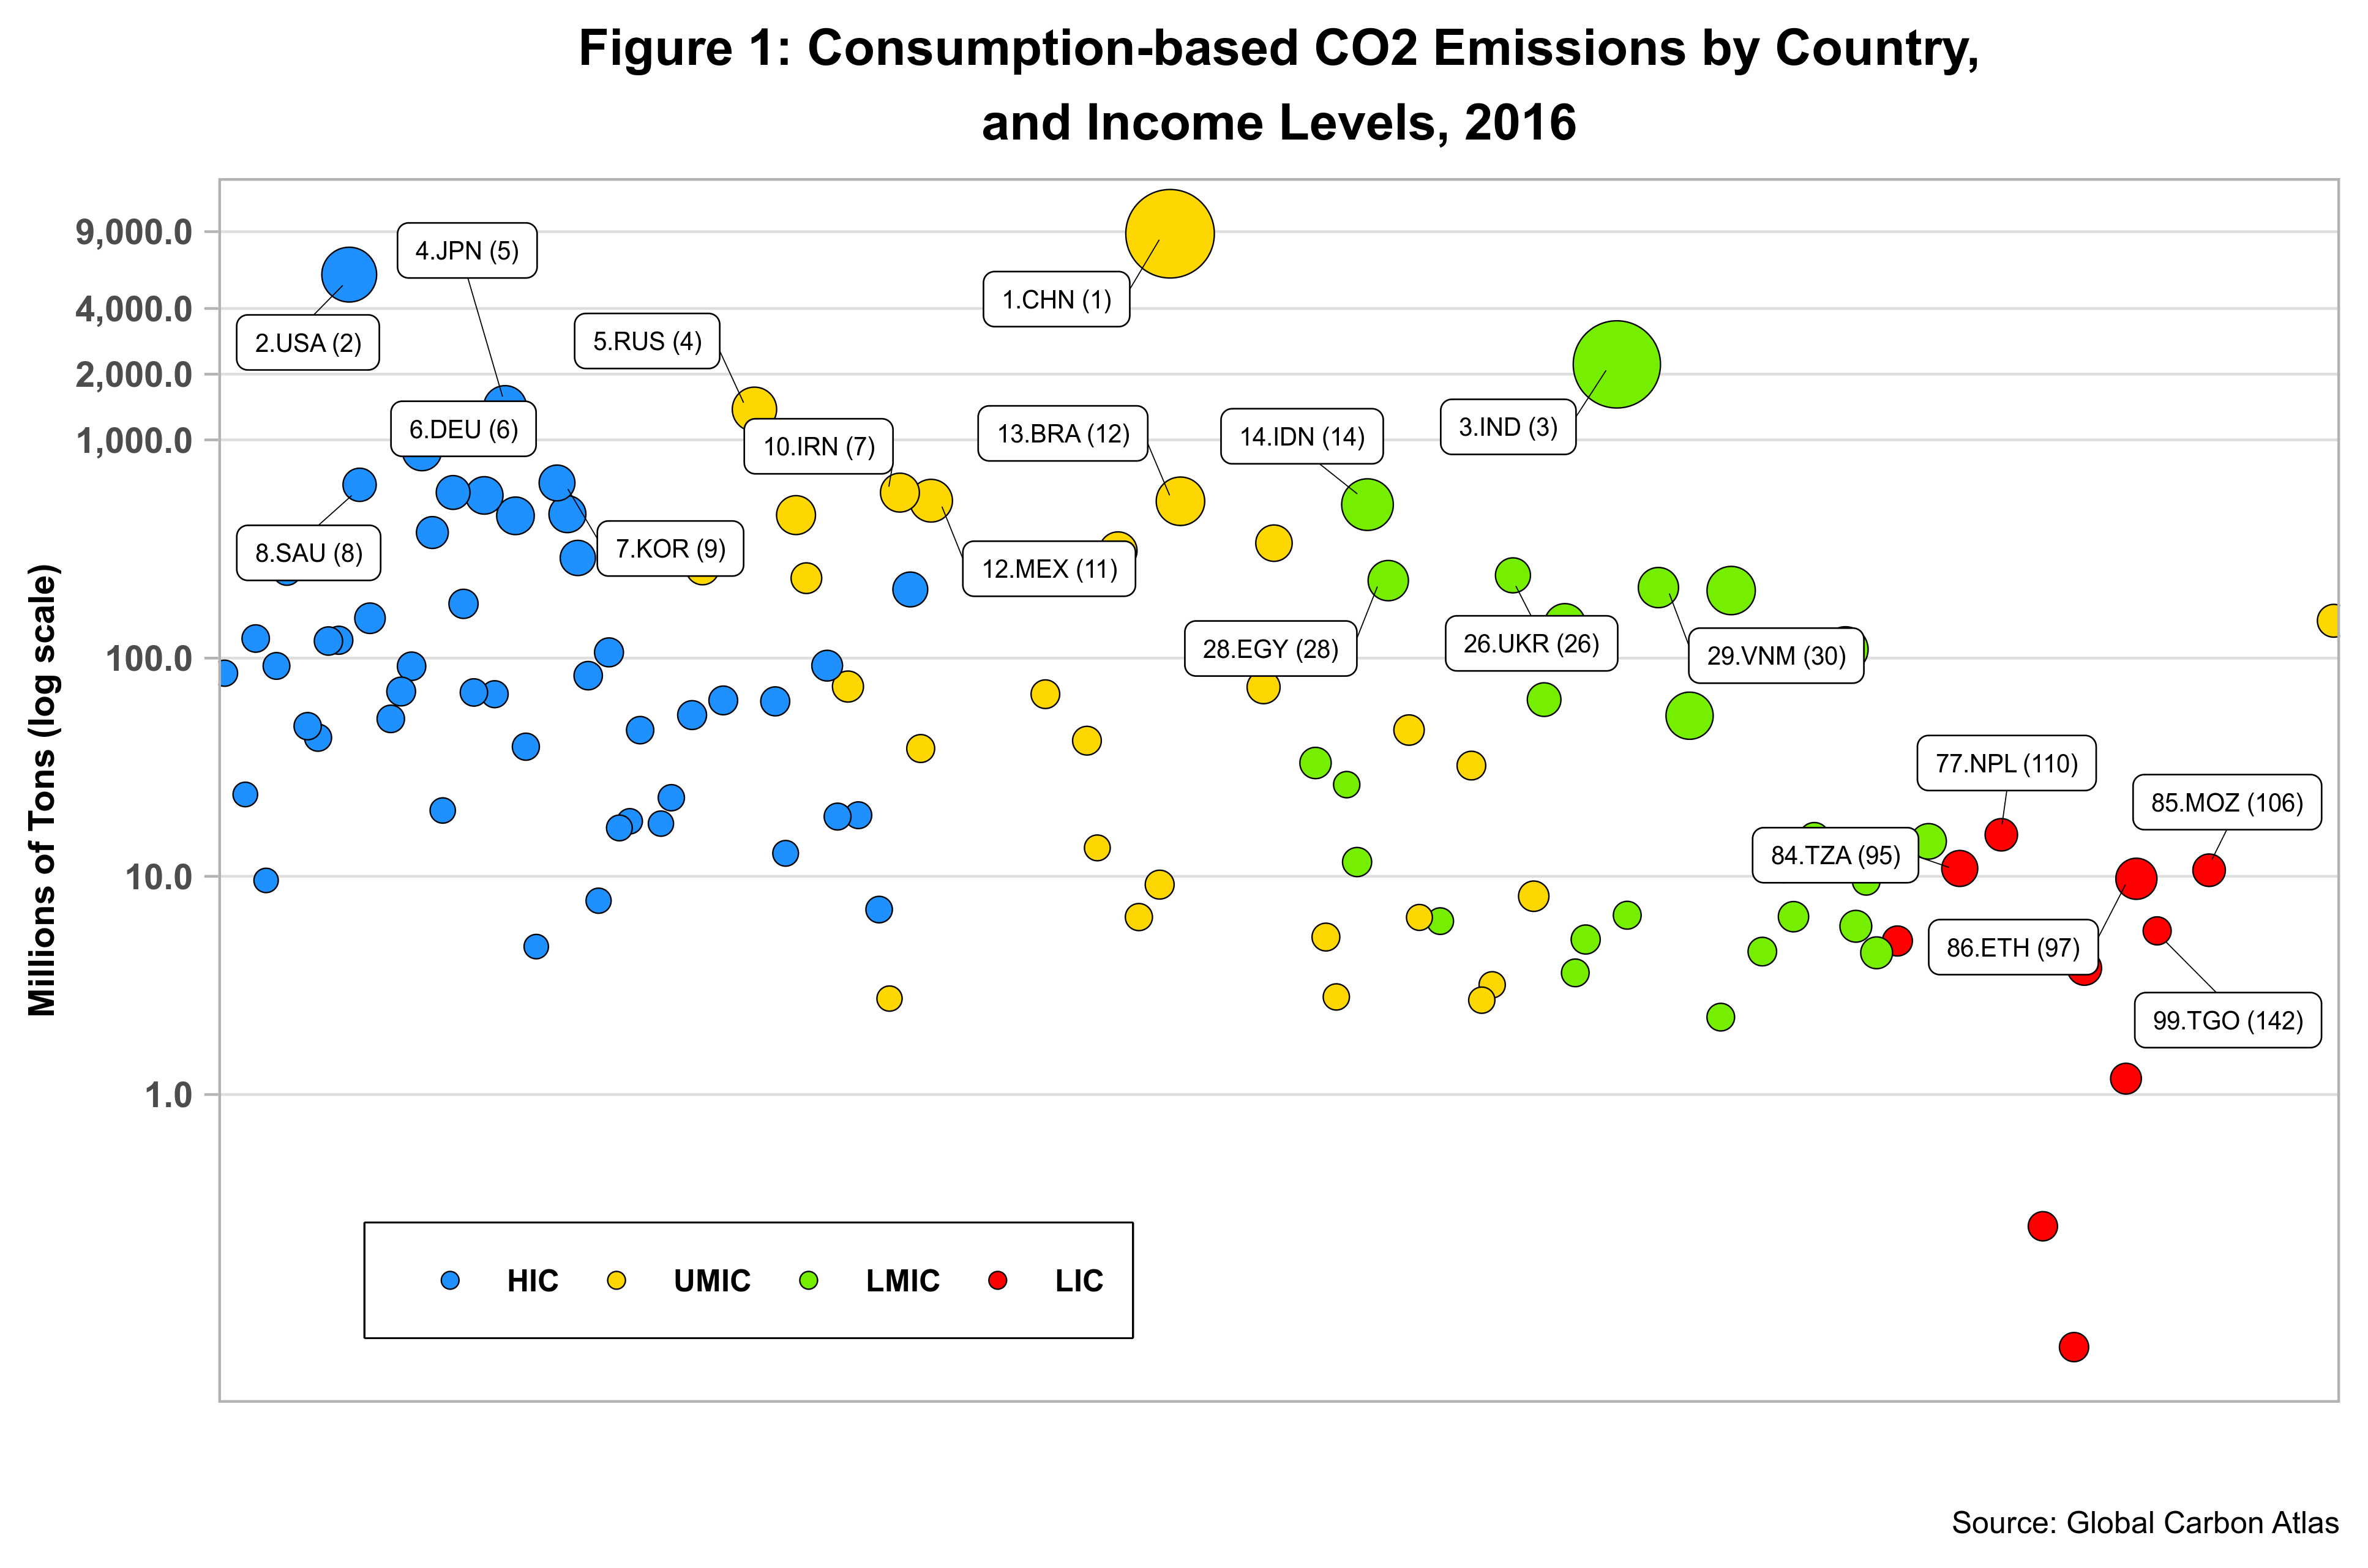 More CO2: Consumption-based Emissions